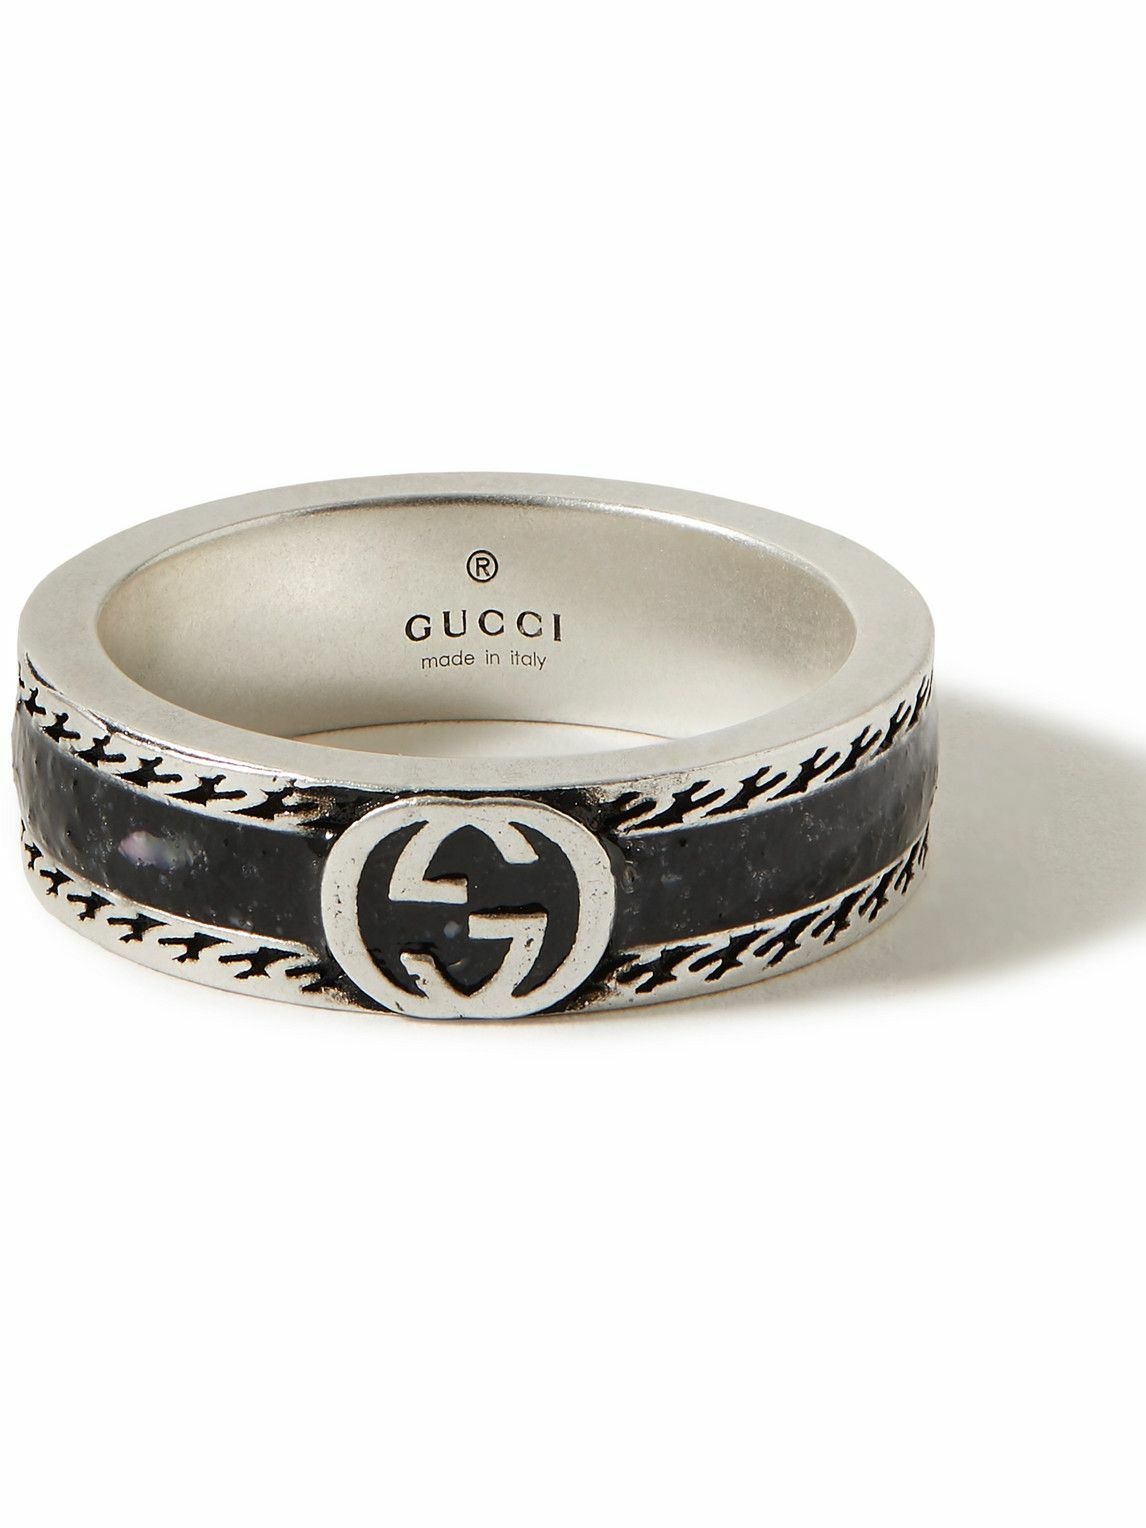 GUCCI - Sterling Silver and Enamel Ring - Black Gucci